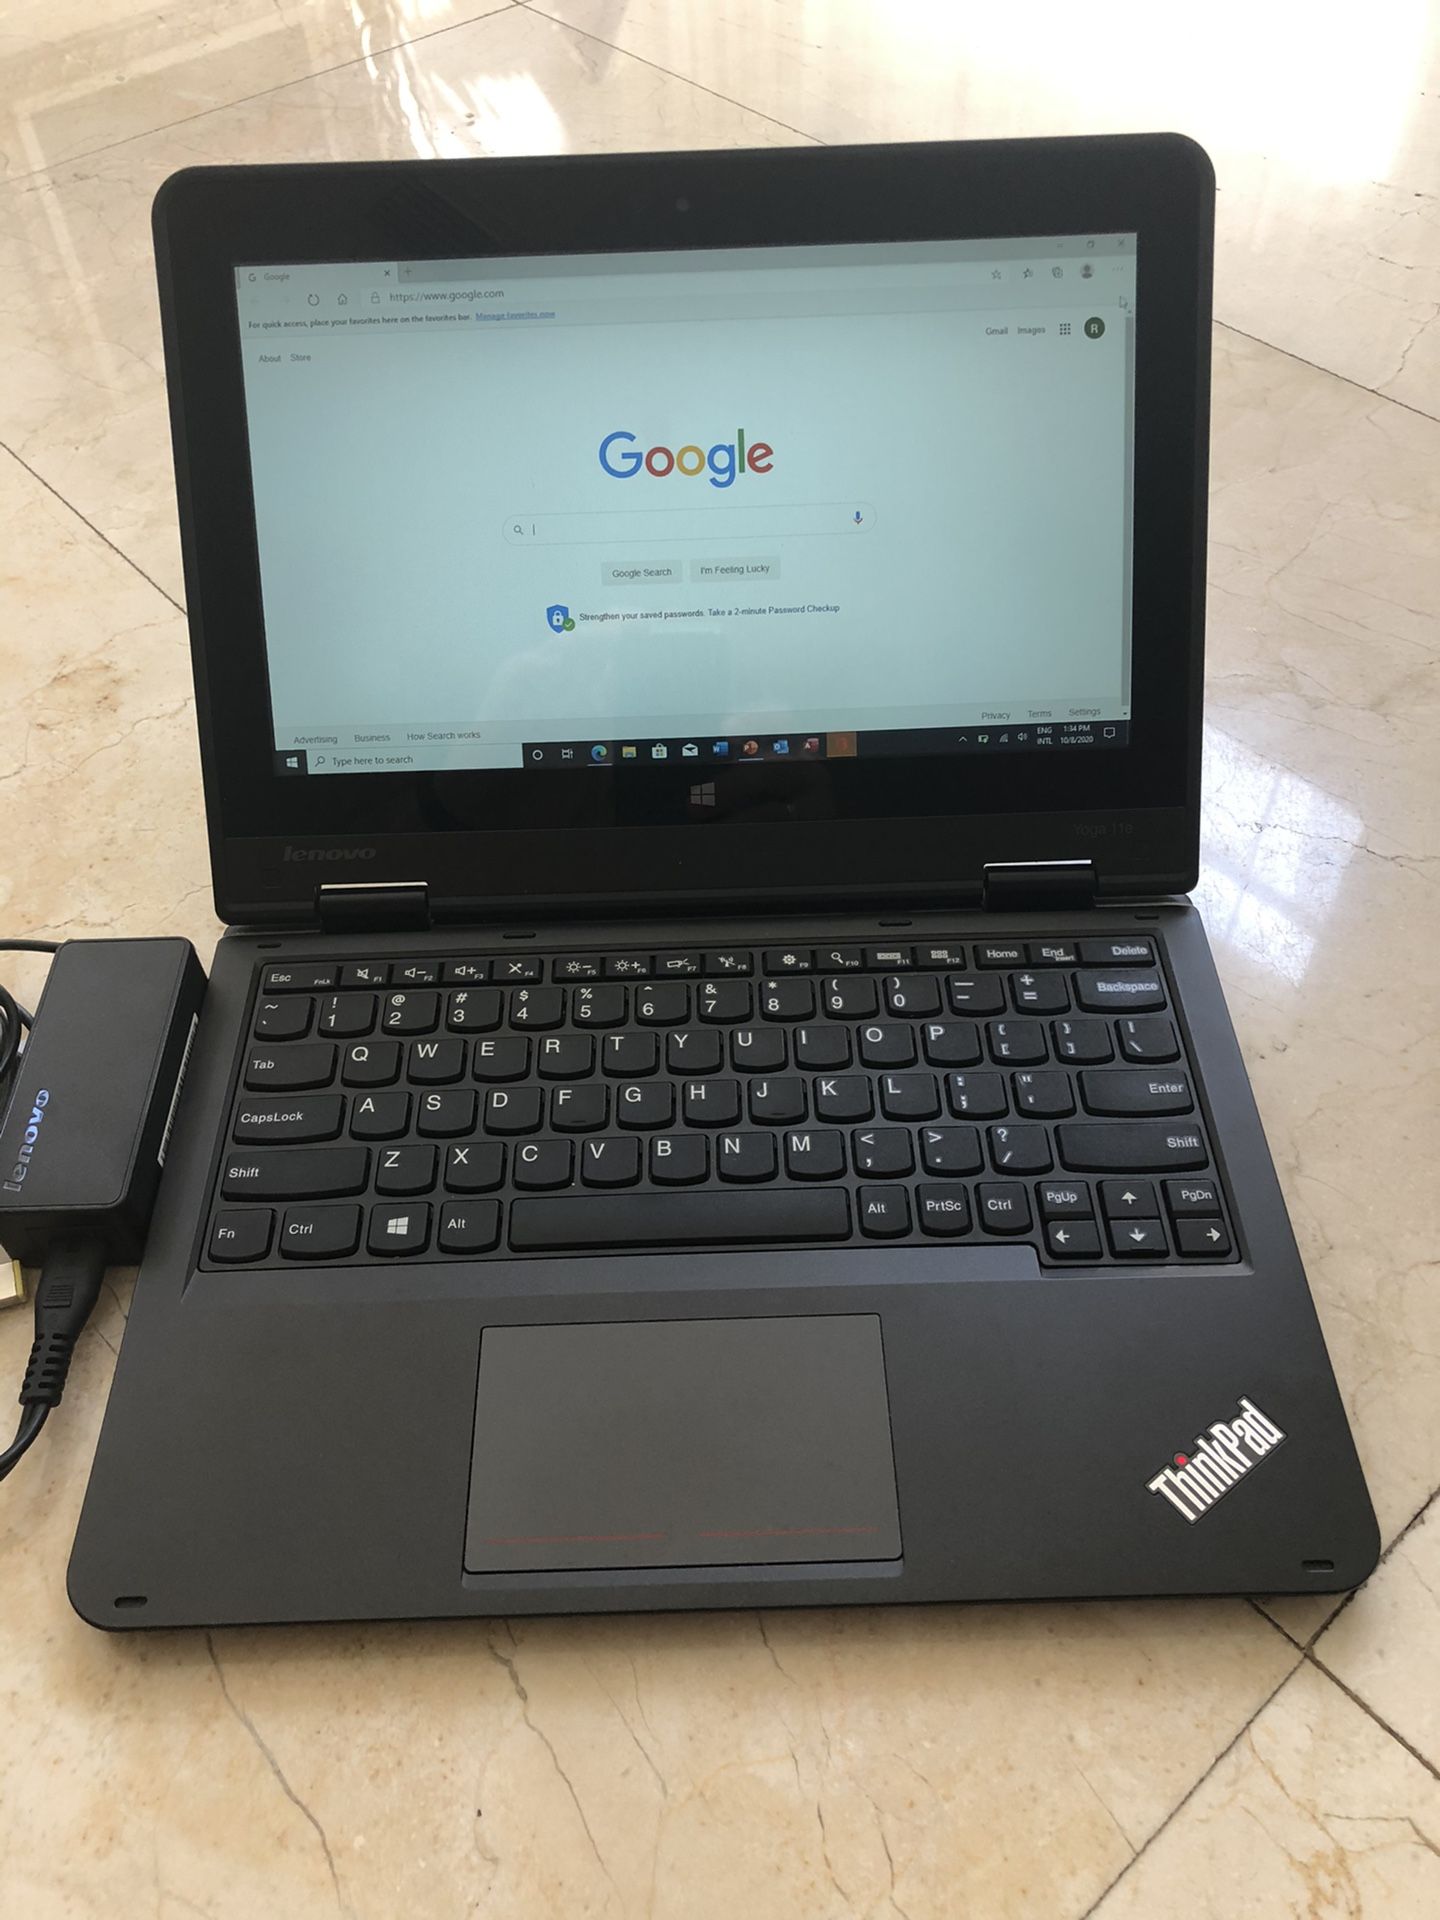 Lenovo Yoga touchscreen Windows 10 Pro laptop 11e 11.6” 8GB RAM 128GB SSD. Comes with Office 2019 Professional Plus installed